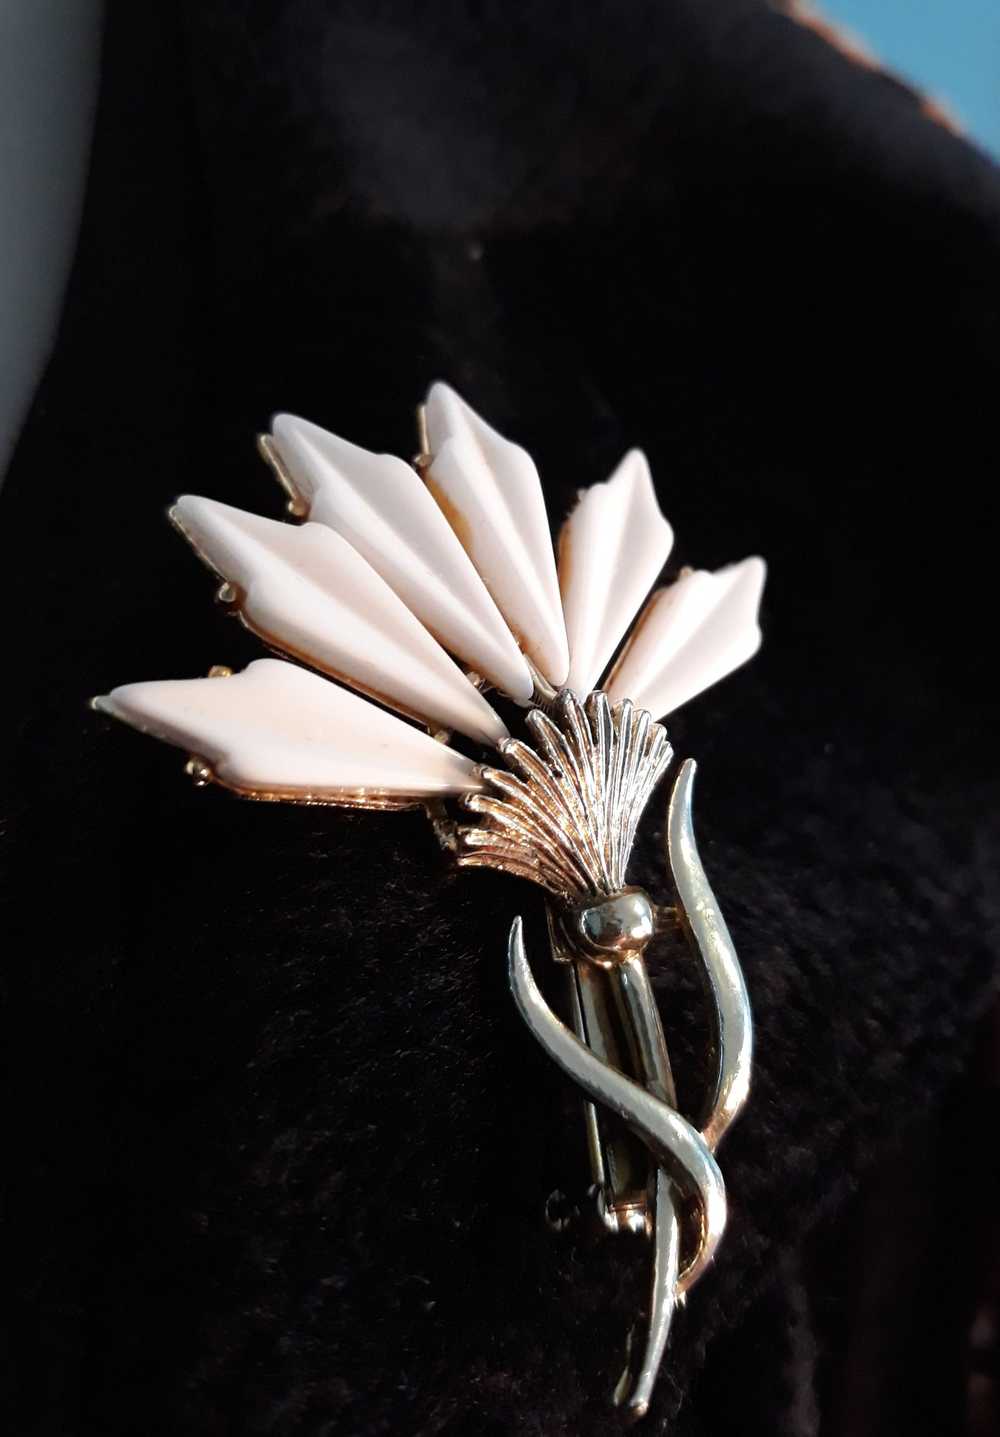 White Thermoset Vintage Thistle Brooch, 1950s-60s - image 3